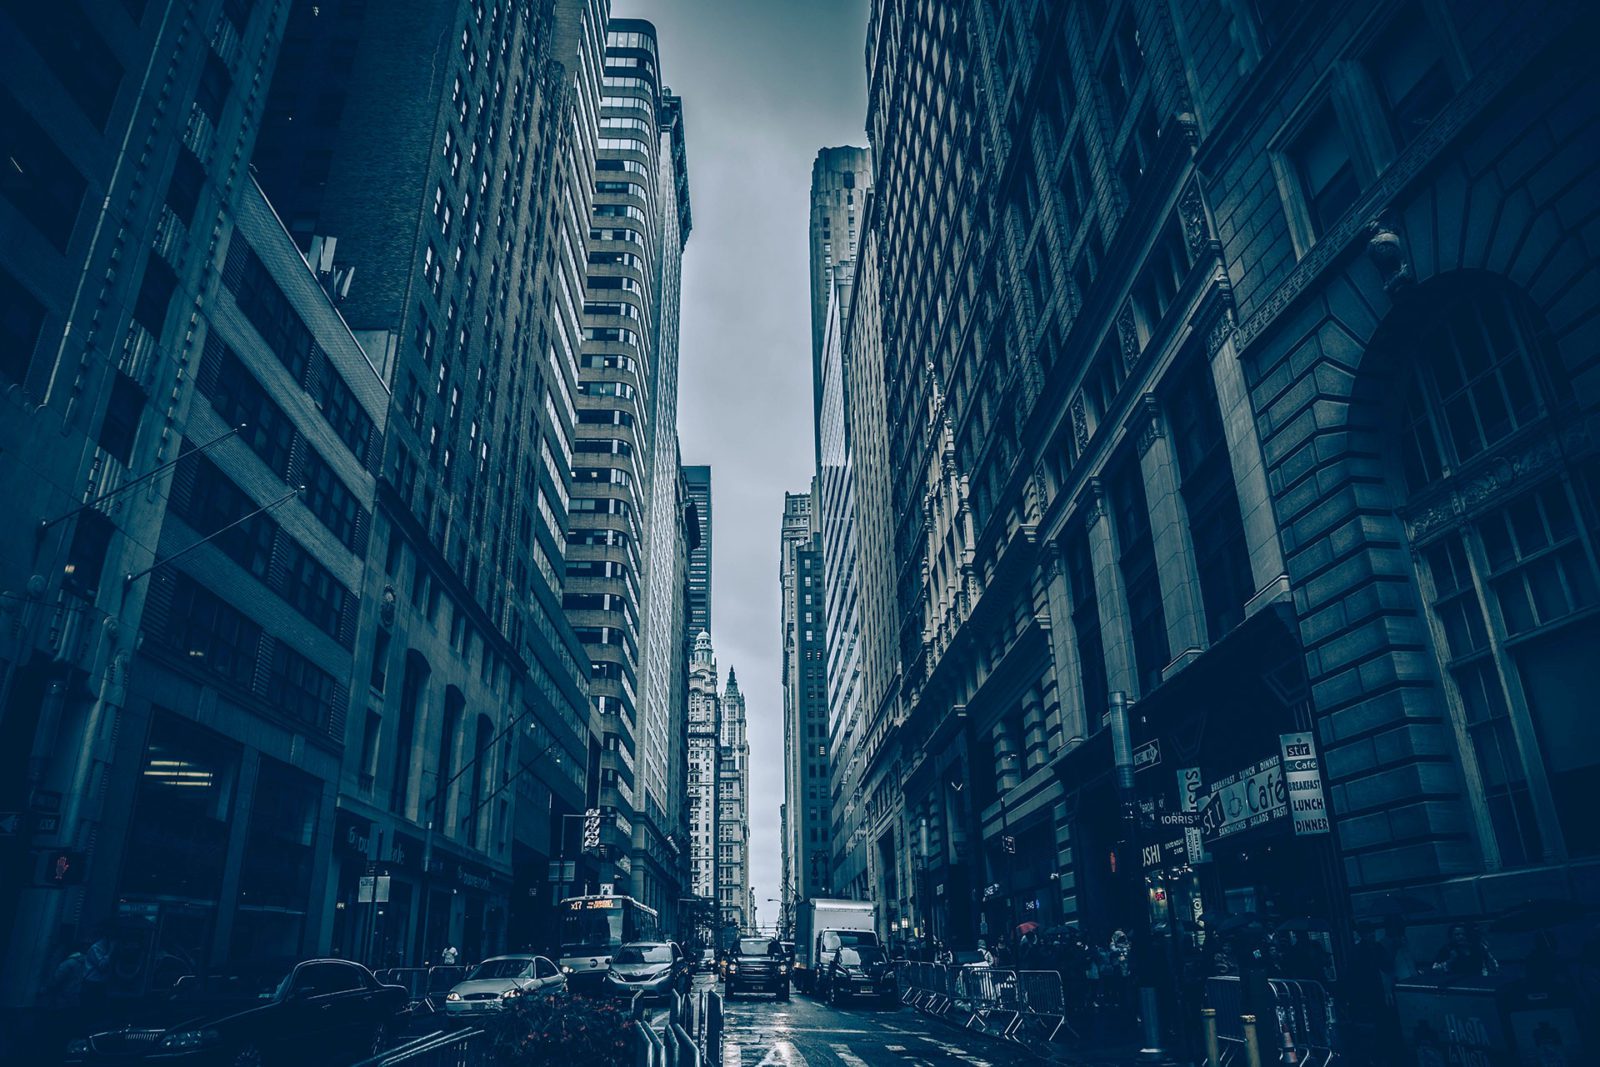 An image of a city street with tall buildings.